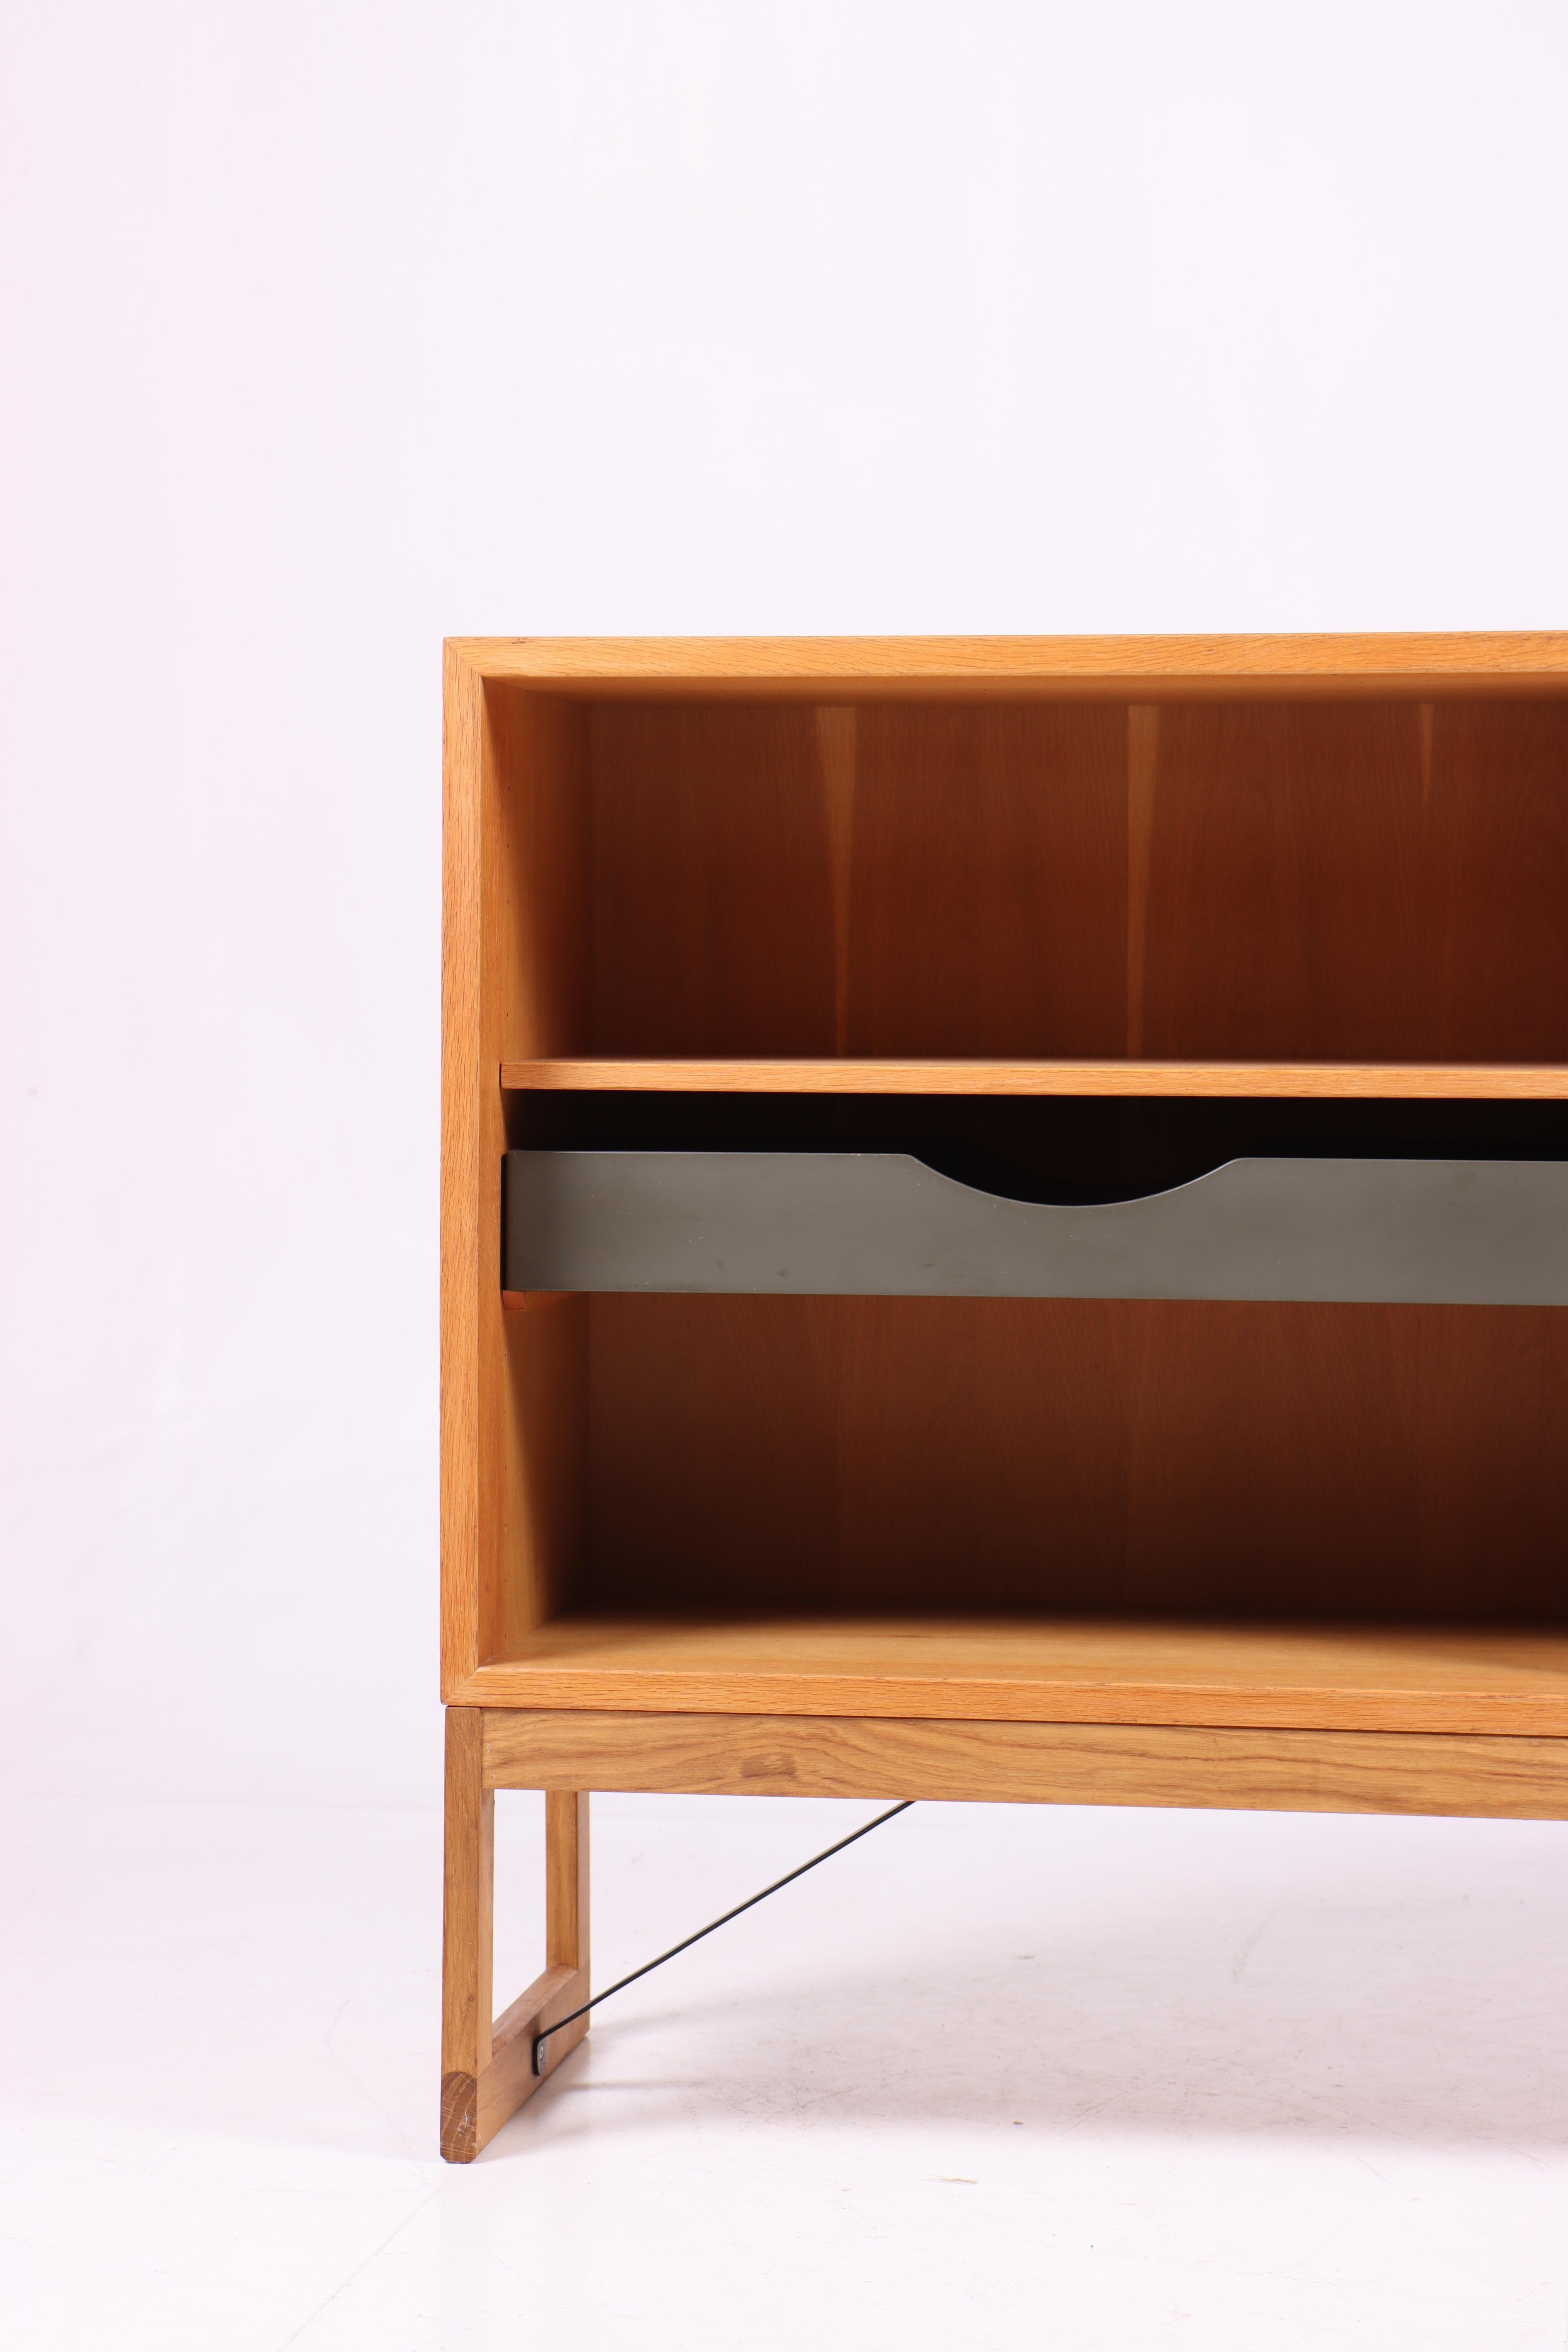 Low bookcase in oak with adjustable shelves and colored drawers. Designed by Danish architect Børge Mogensen for Karl Andersson cabinetmakers. Made in Sweden in the 1960s. Great original condition.